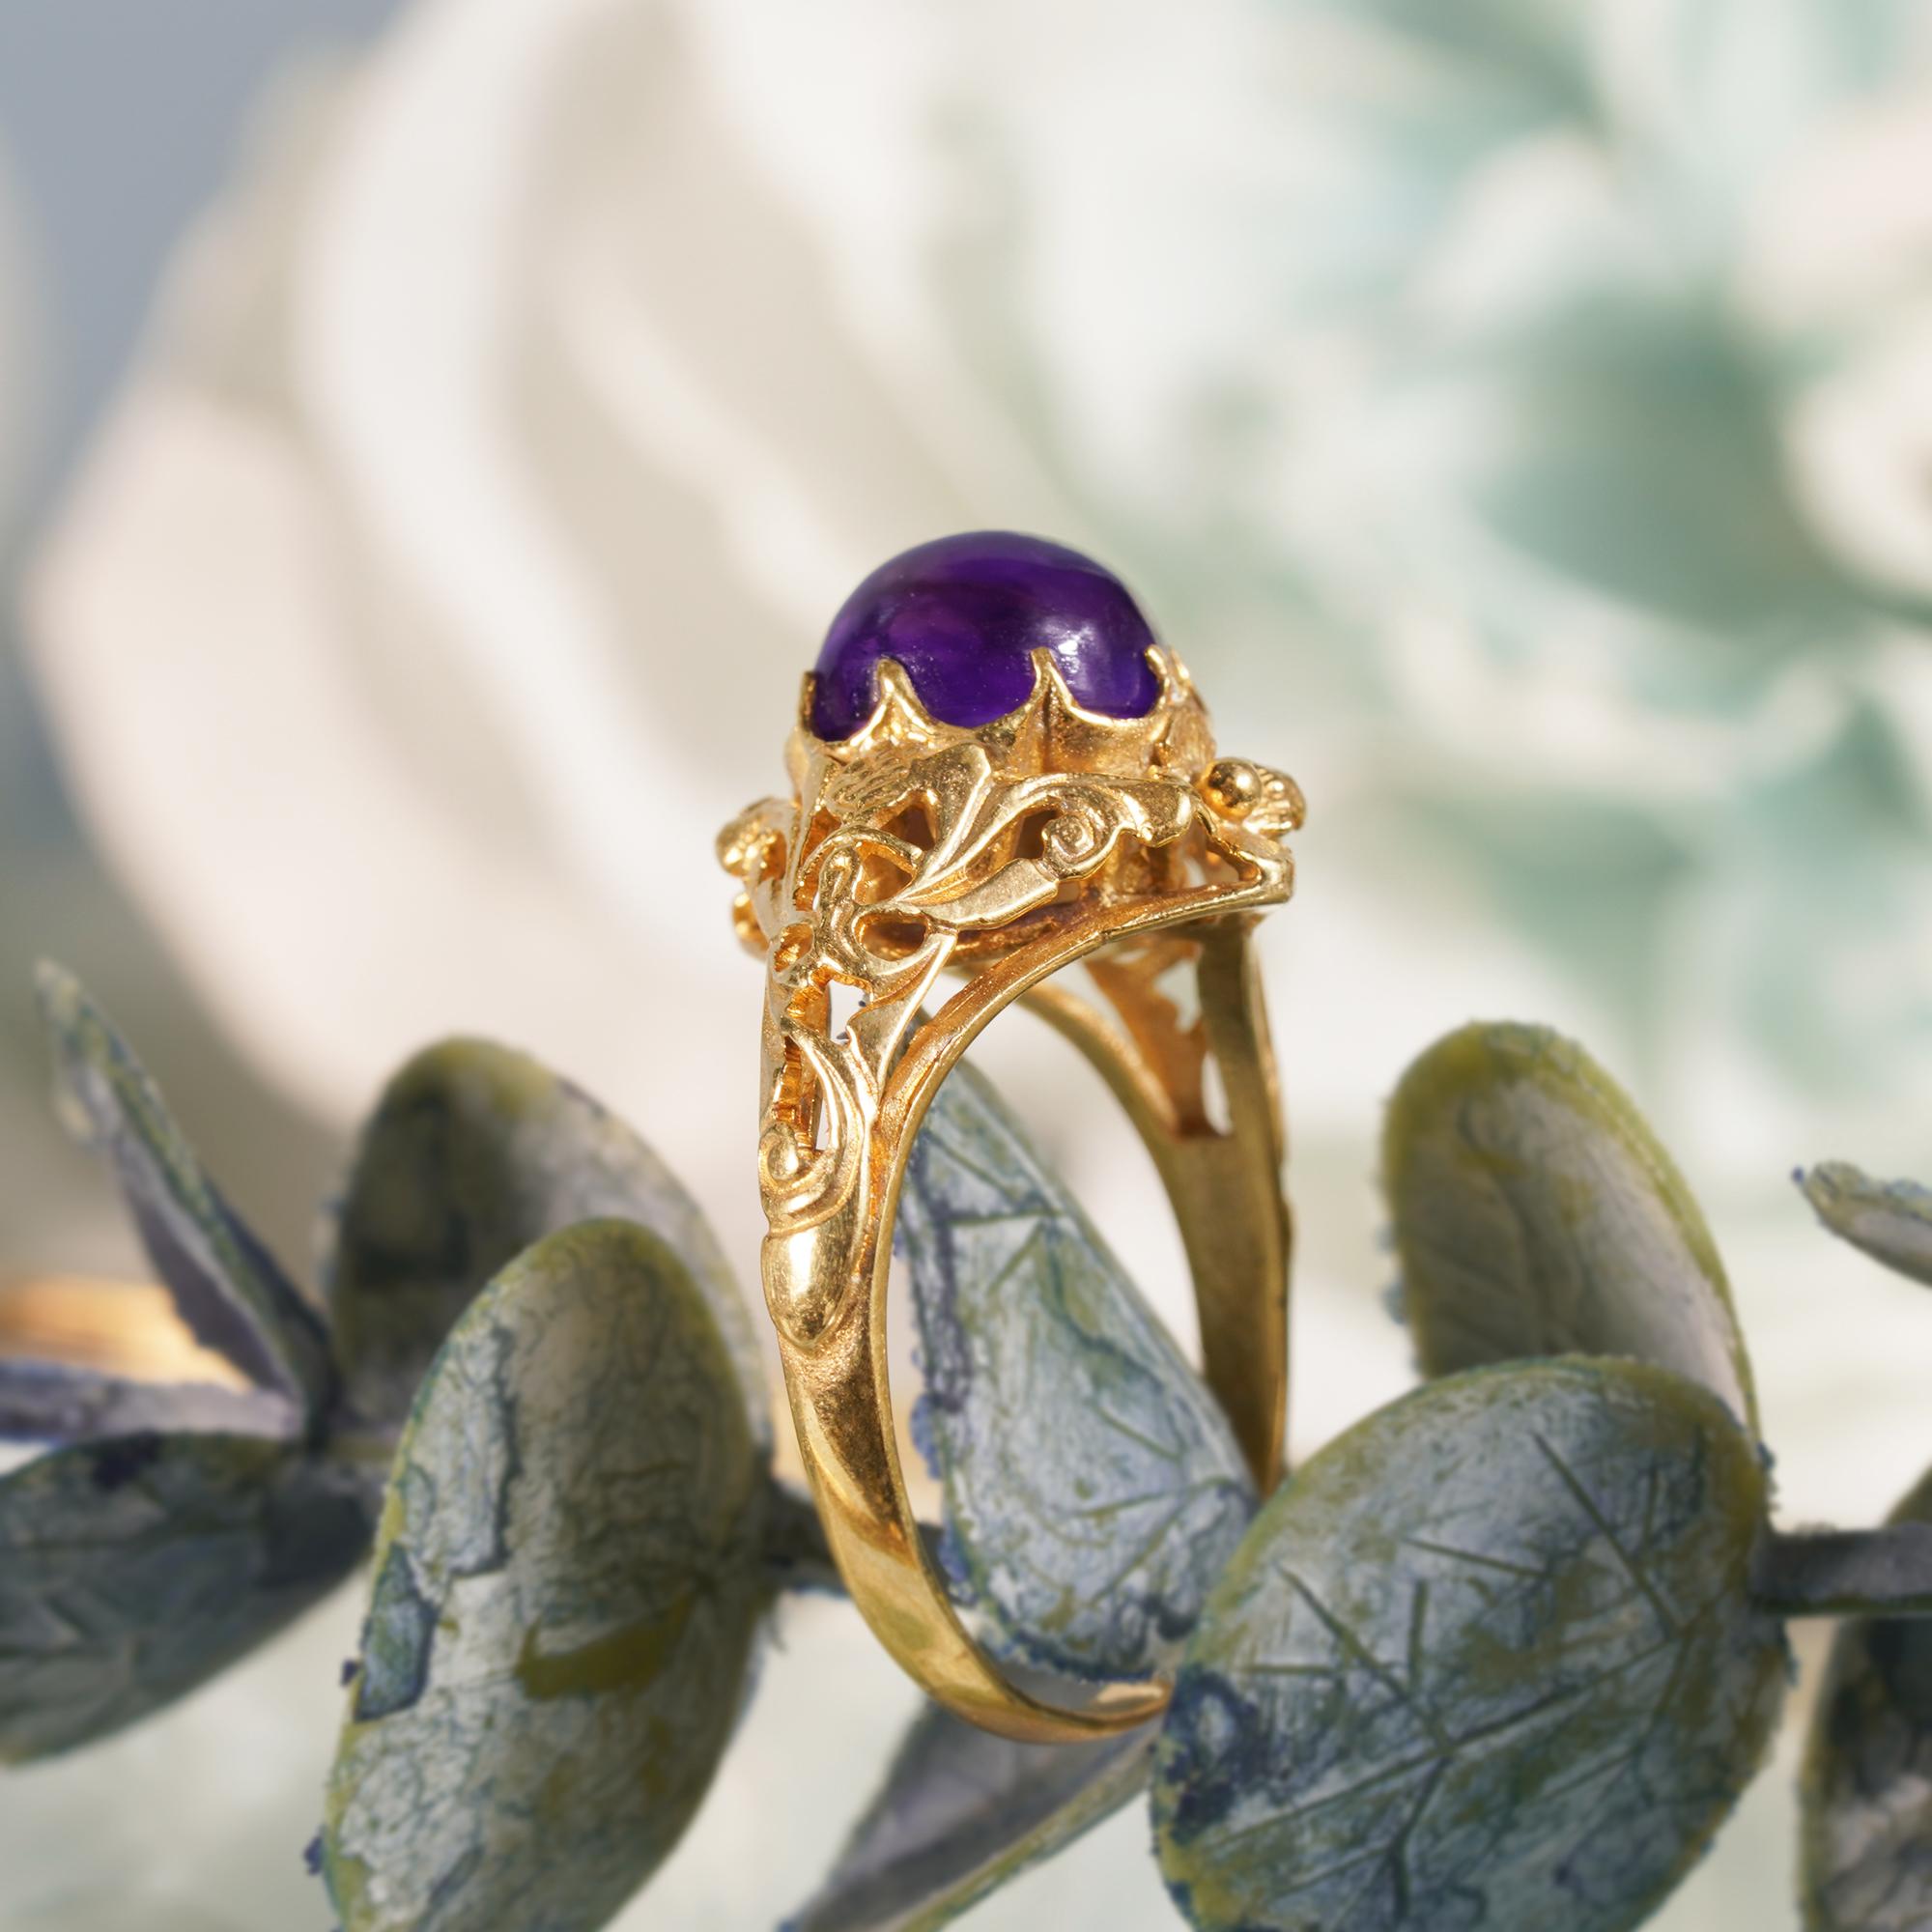 For Sale:  Natural Cabochon Amethyst Vintage Style Filigree Ring in Solid 9K Yellow Gold 7